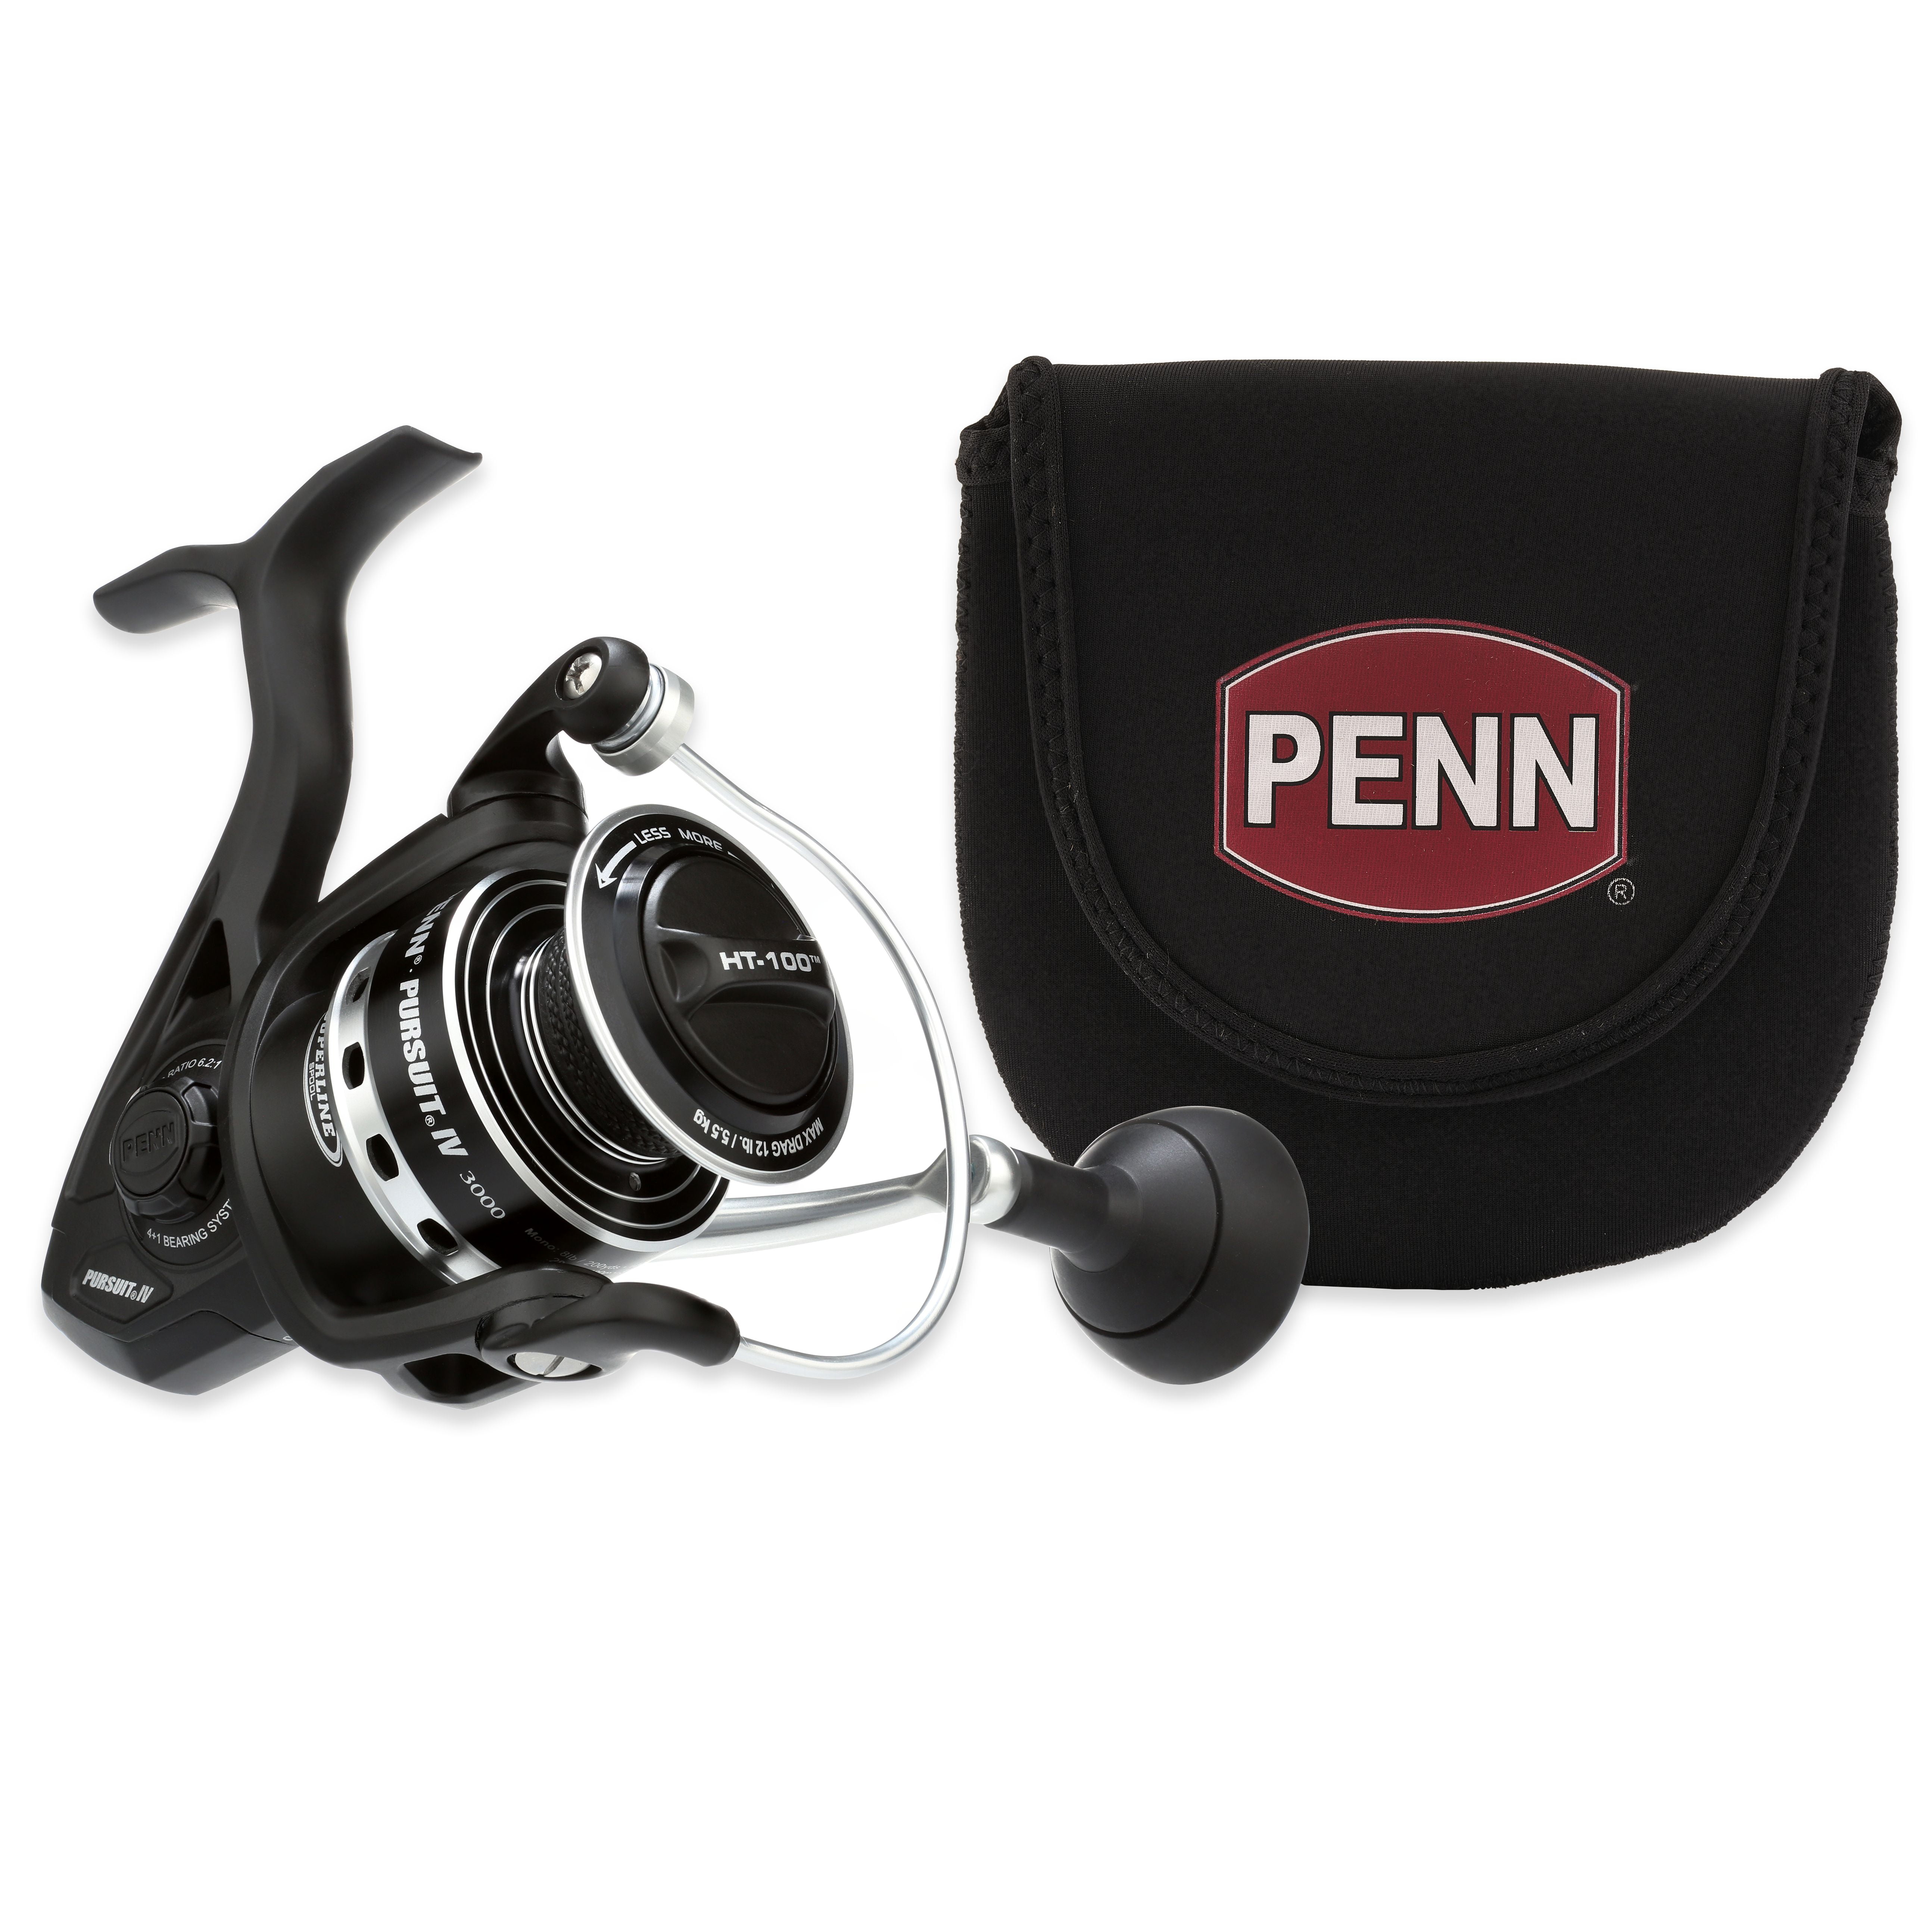 PENN Pursuit IV Spinning Reel Kit, Size 3000, Includes Reel Cover